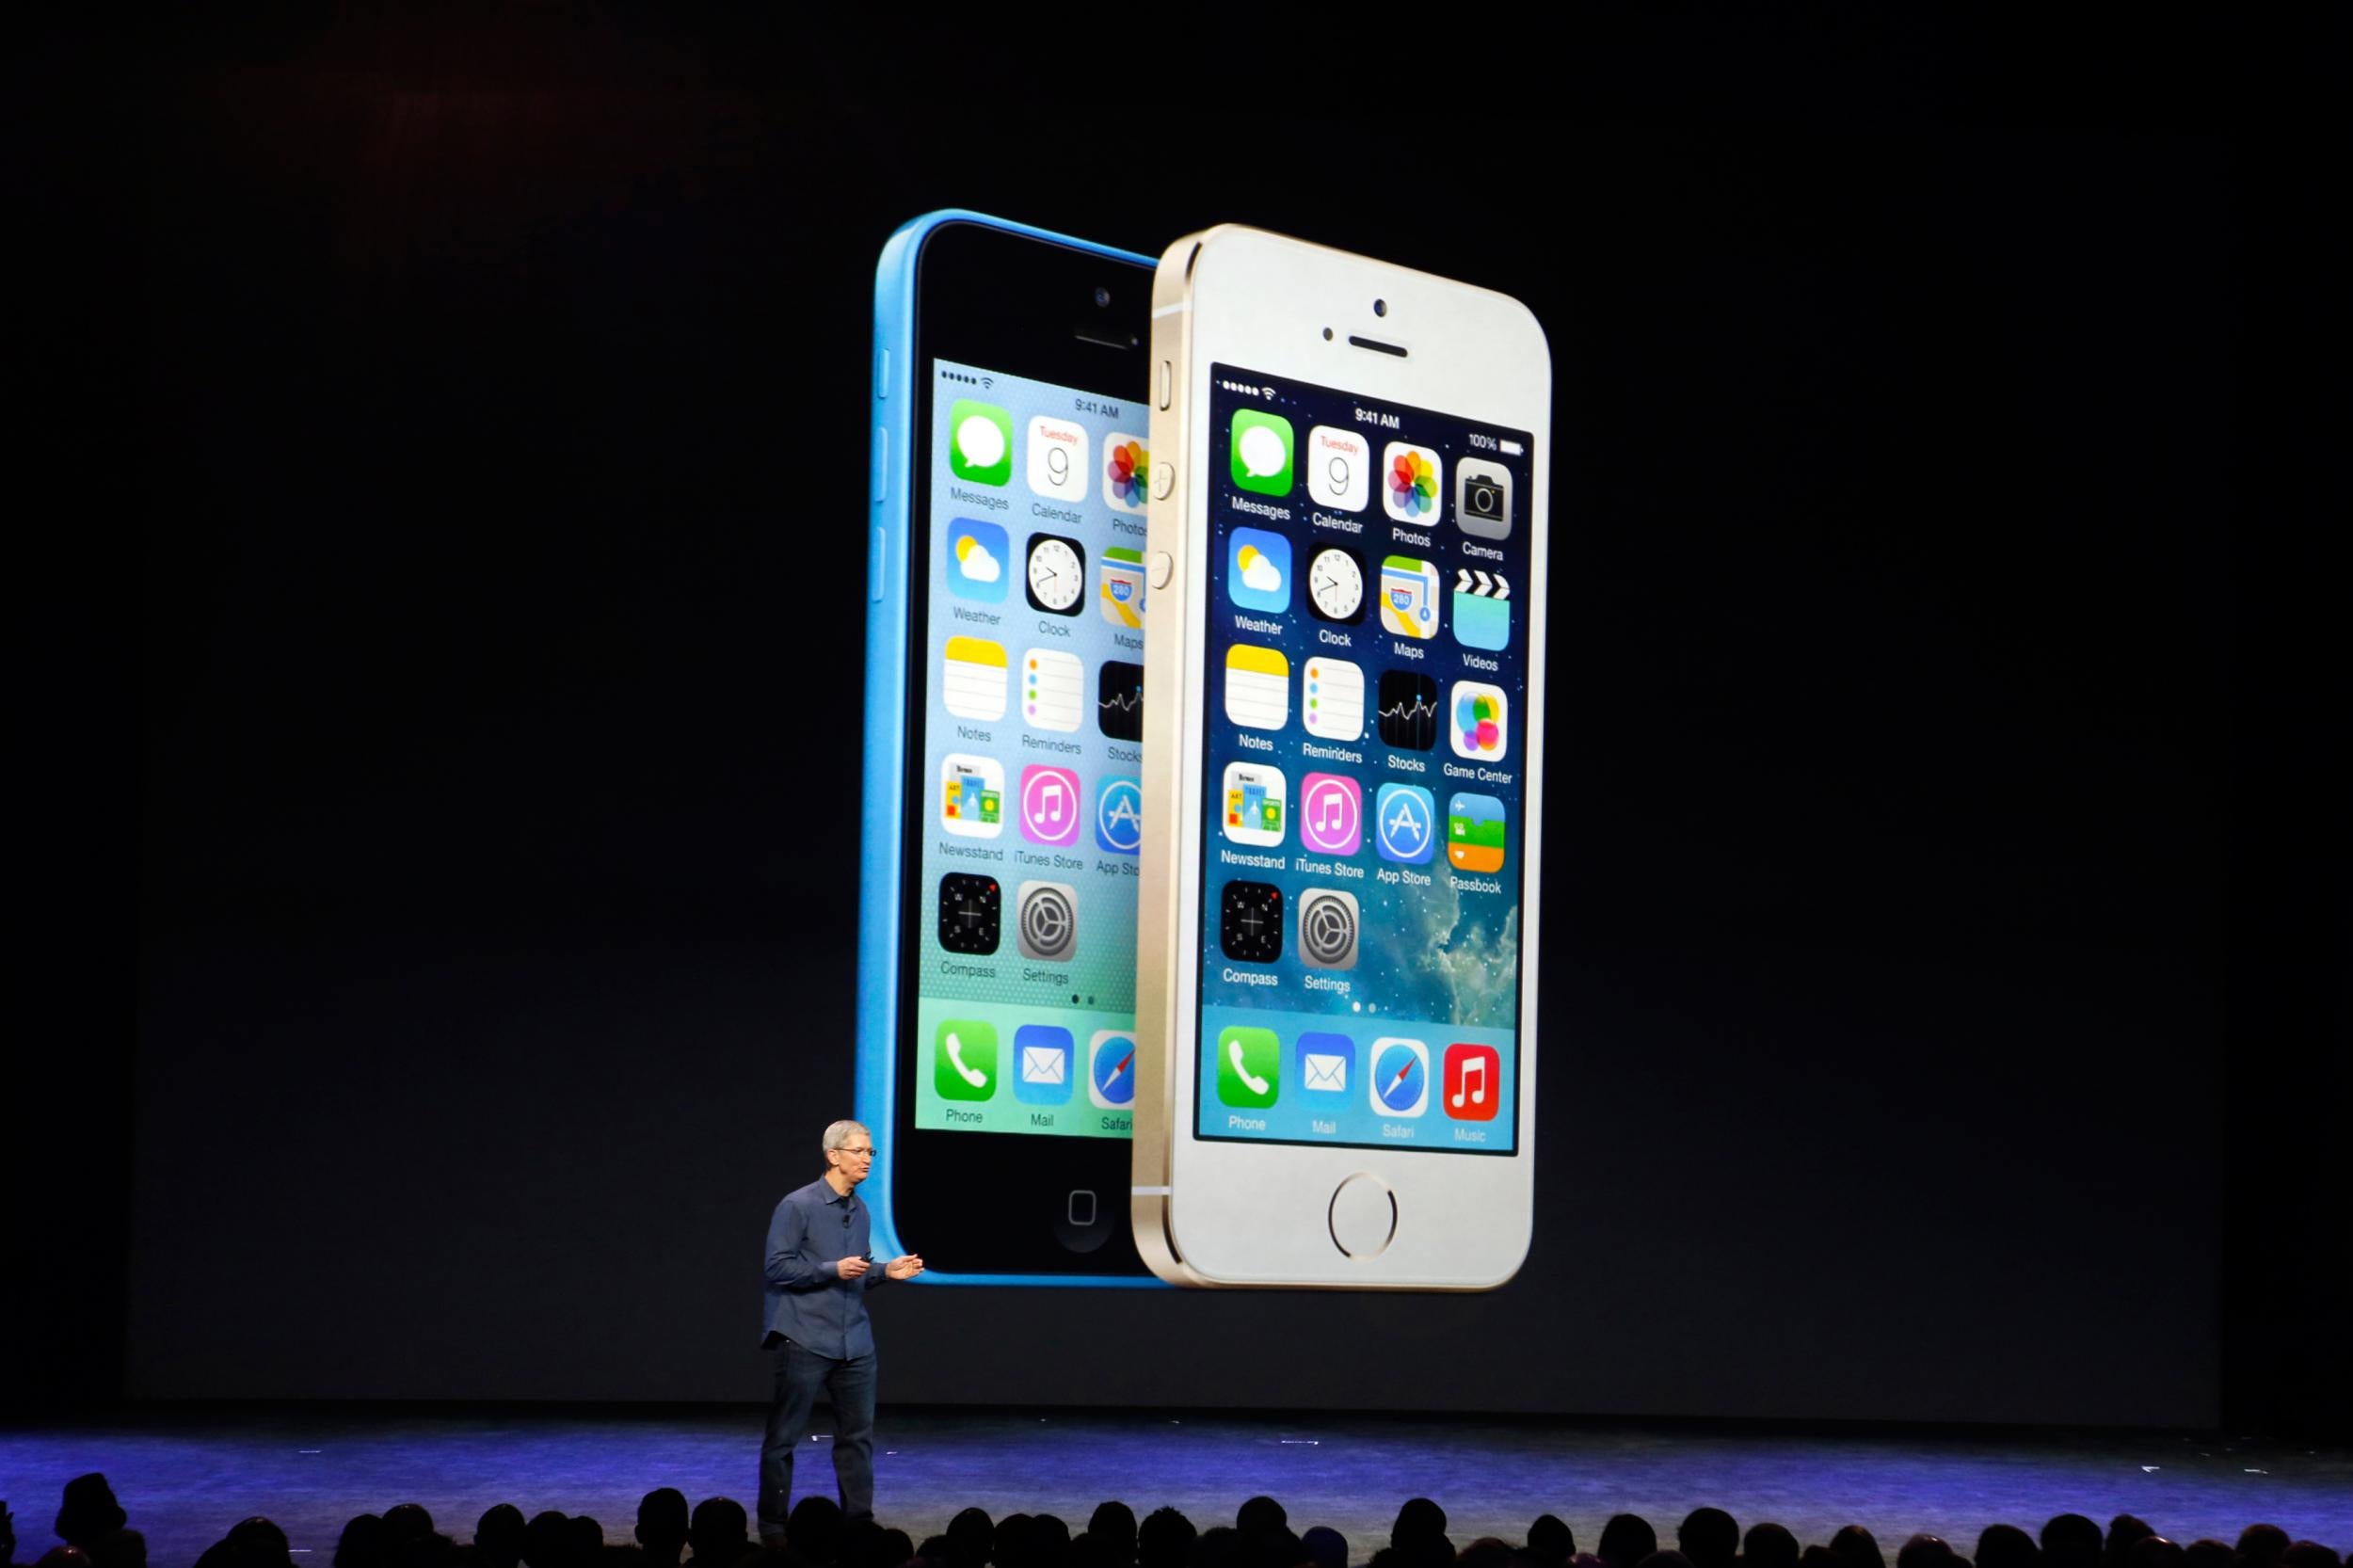 Tim Cook speaks during an Apple event to announce the iPhone 6 and the iPhone 6 Plus at the Flint Center in Cupertino, California, September 9, 2014.